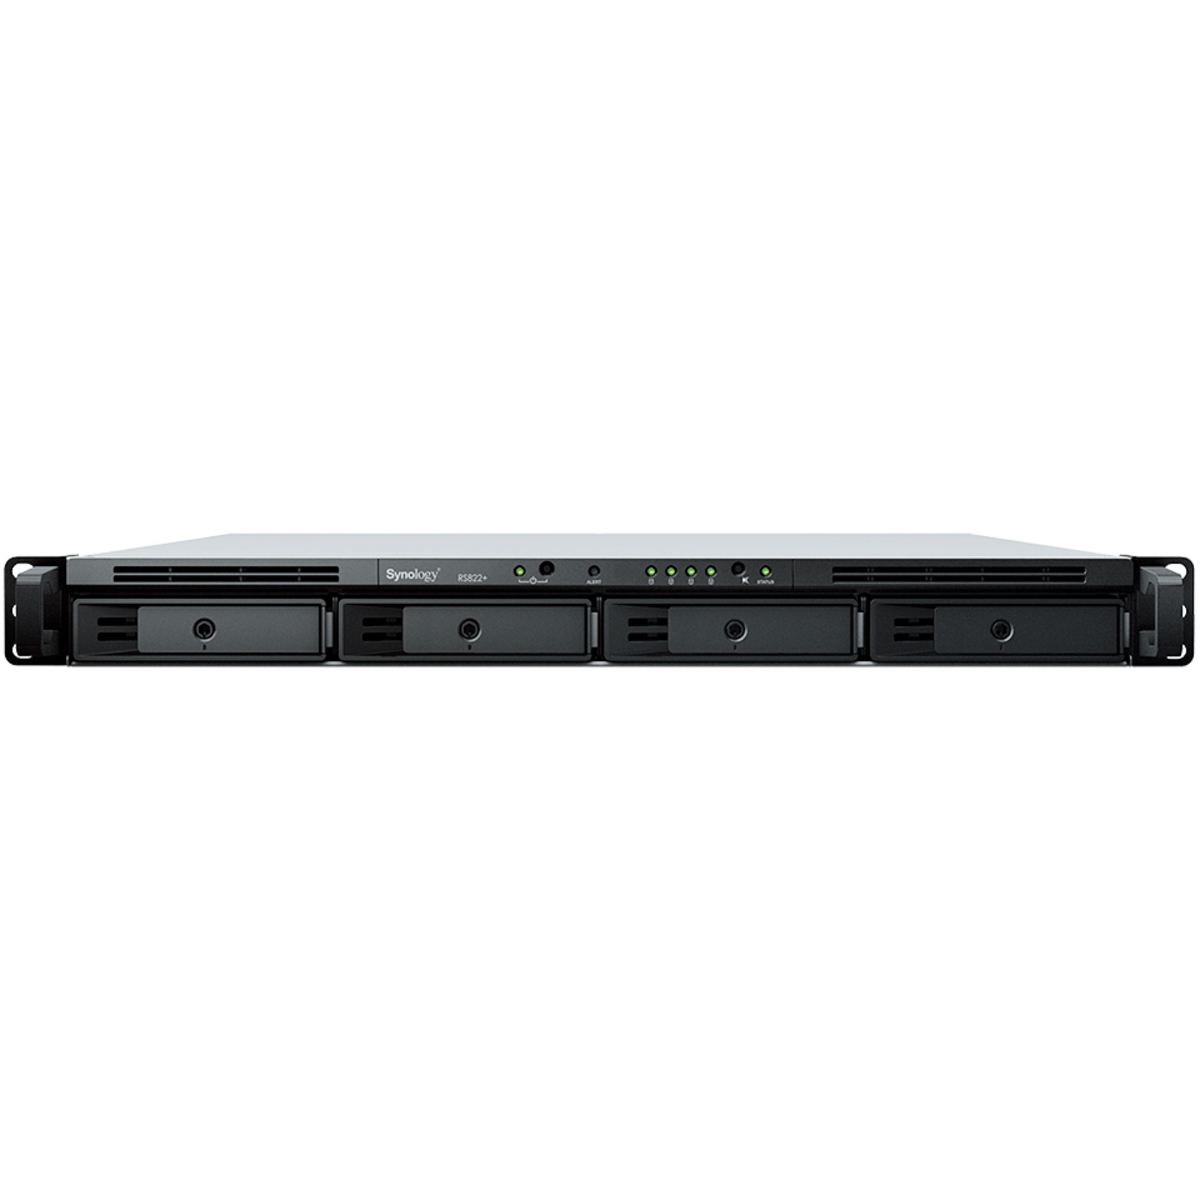 buy $3196 Synology RackStation RS822RP+ 80tb RackMount NAS - Network Attached Storage Device 4x20000gb Western Digital Red Pro WD201KFGX 3.5 7200rpm SATA 6Gb/s HDD NAS Class Drives Installed - Burn-In Tested - nas headquarters buy network attached storage server device das new raid-5 free shipping usa RackStation RS822RP+